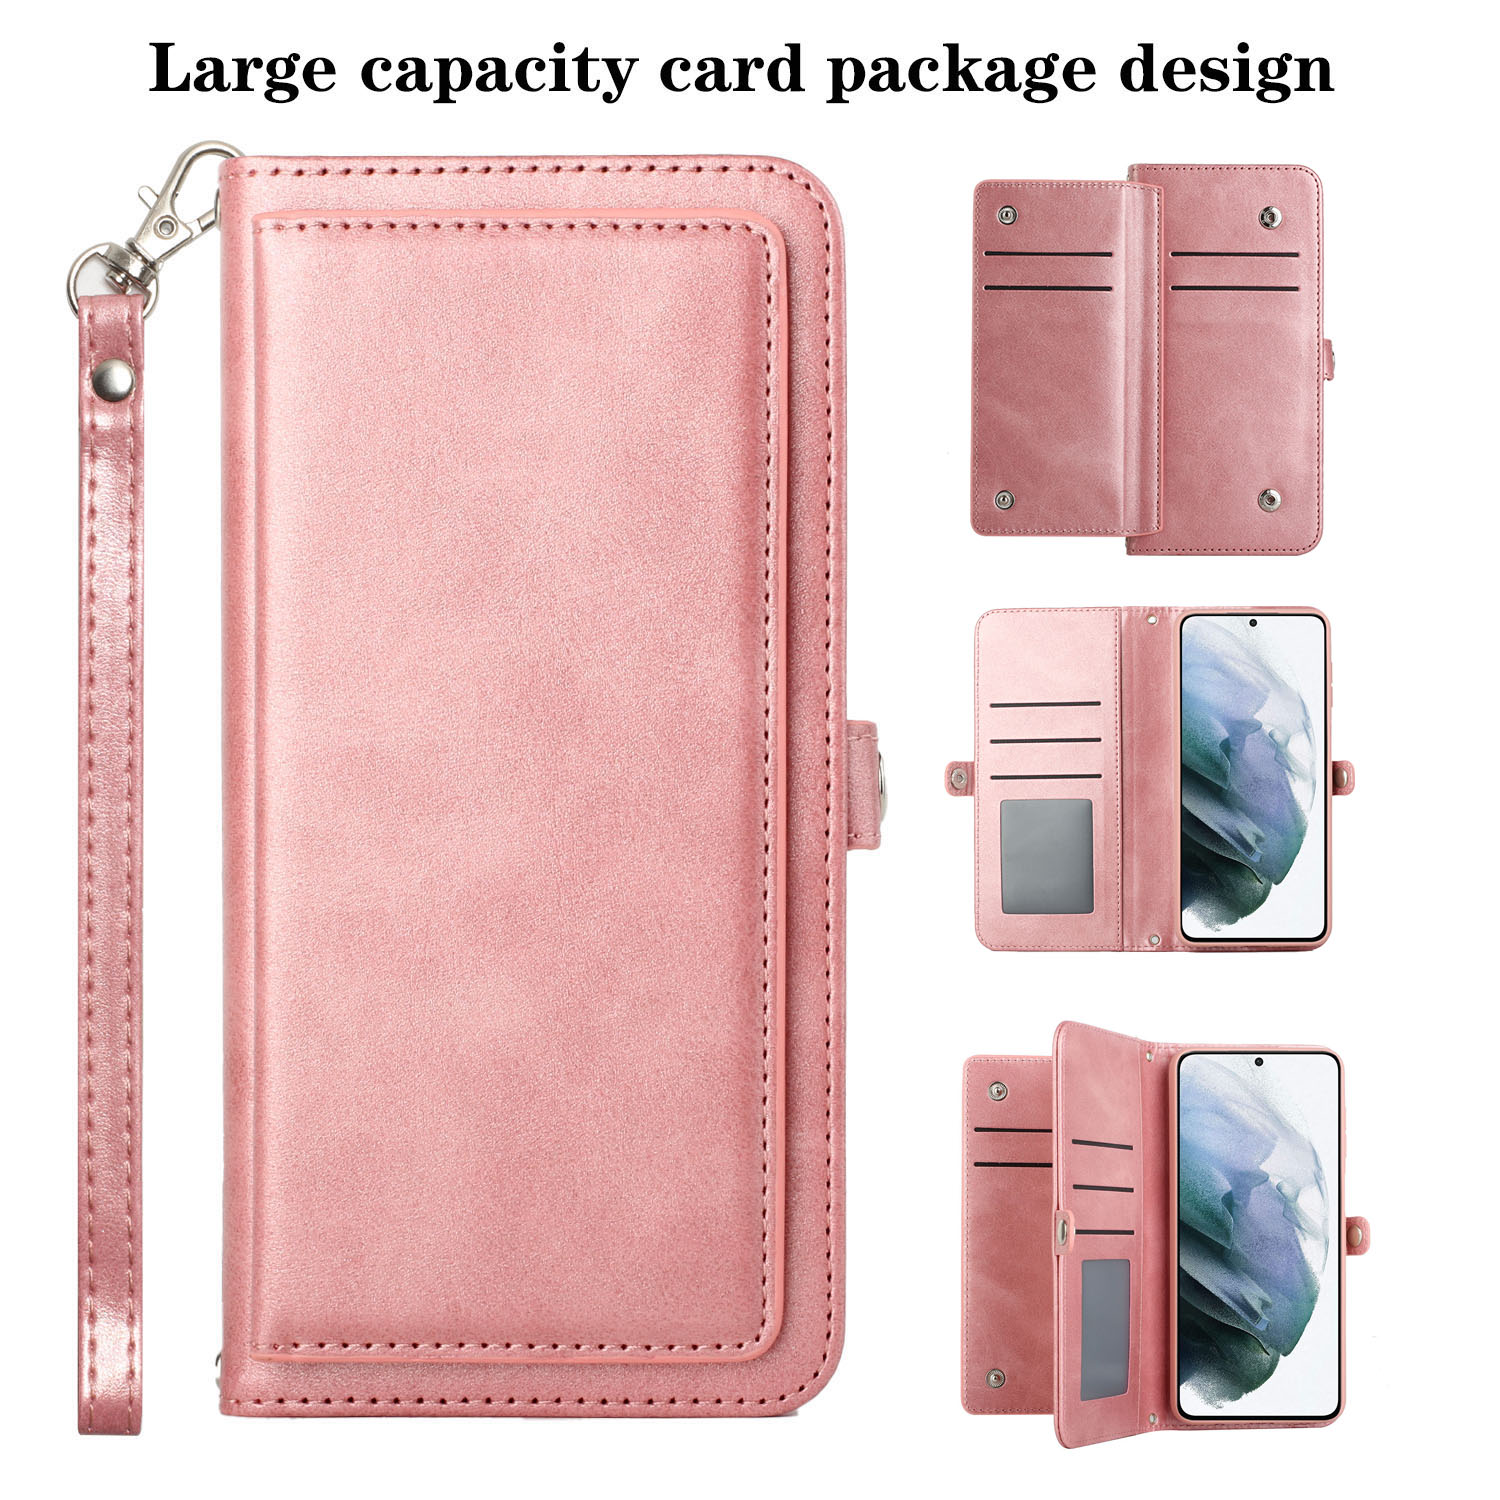 Premium PU Leather Folio Wallet Front Cover Case for Galaxy A33 5G (Pink)